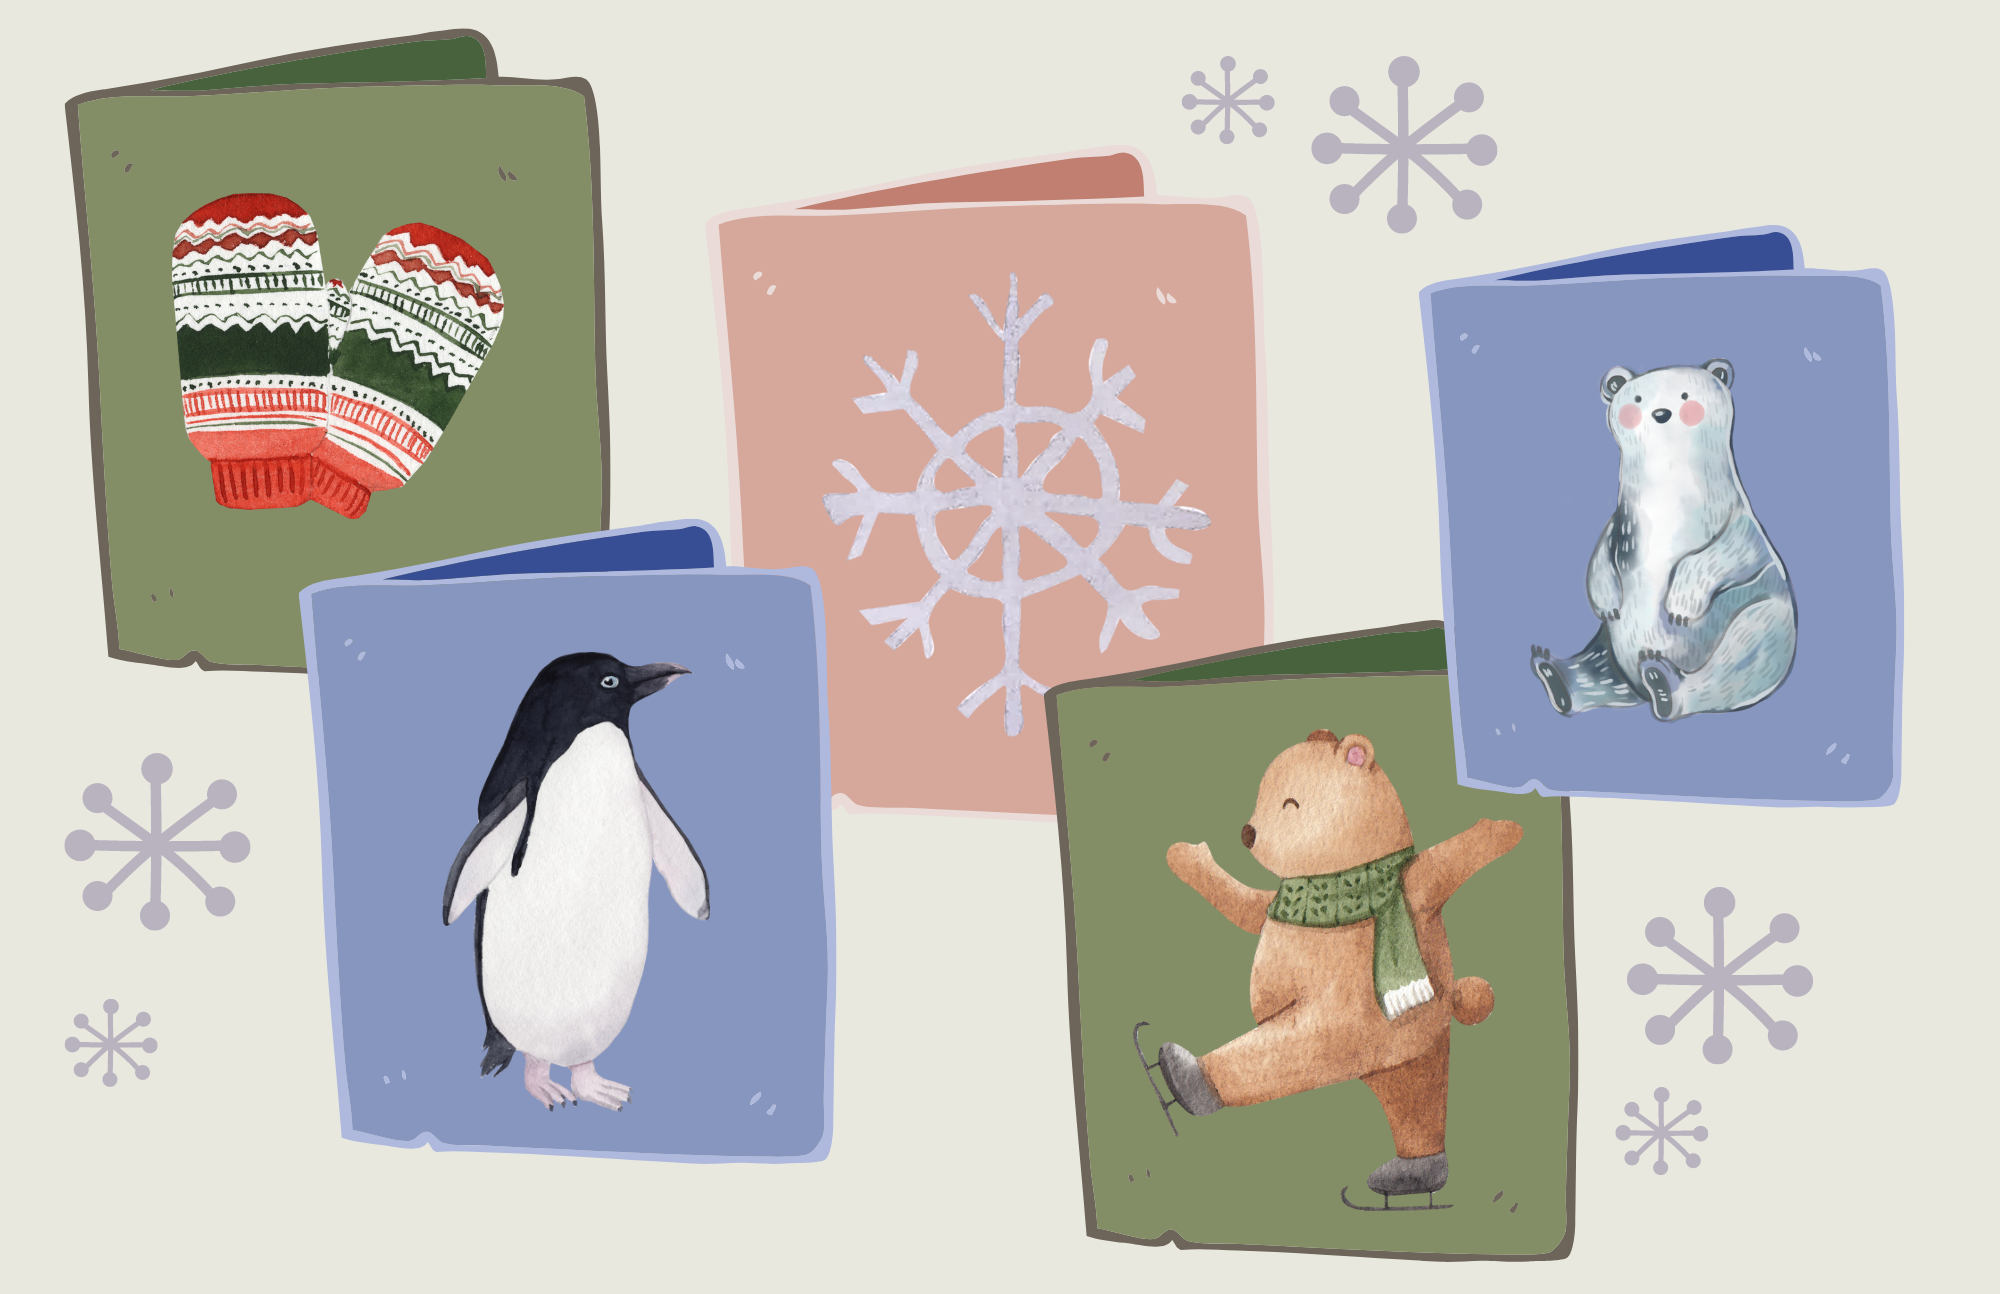 Shows winter-themed cards